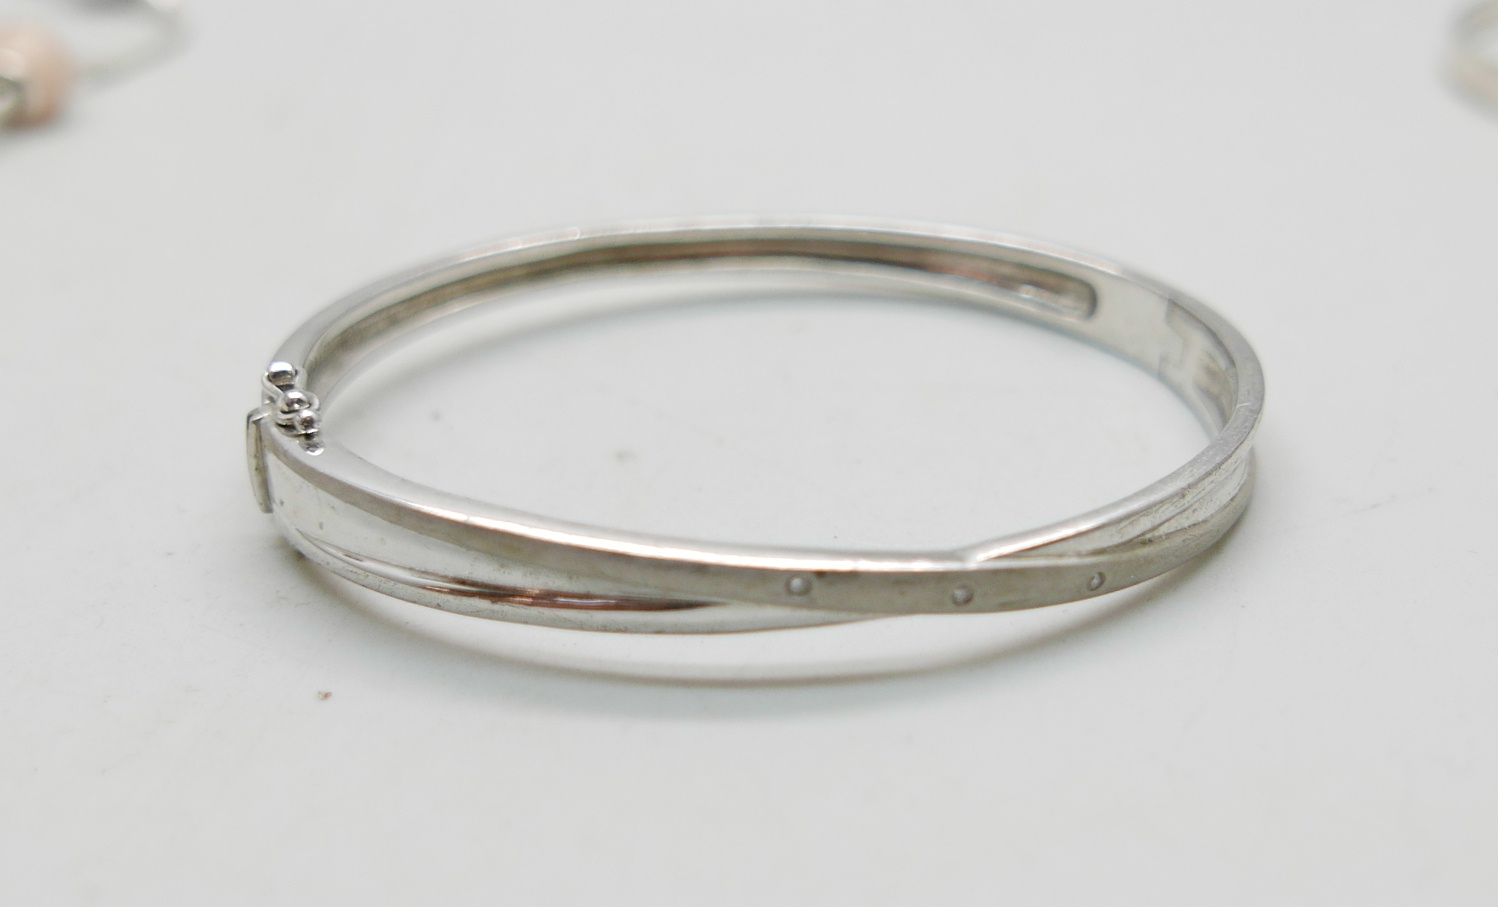 Two silver bangles and a Pandora bracelet - Image 4 of 4